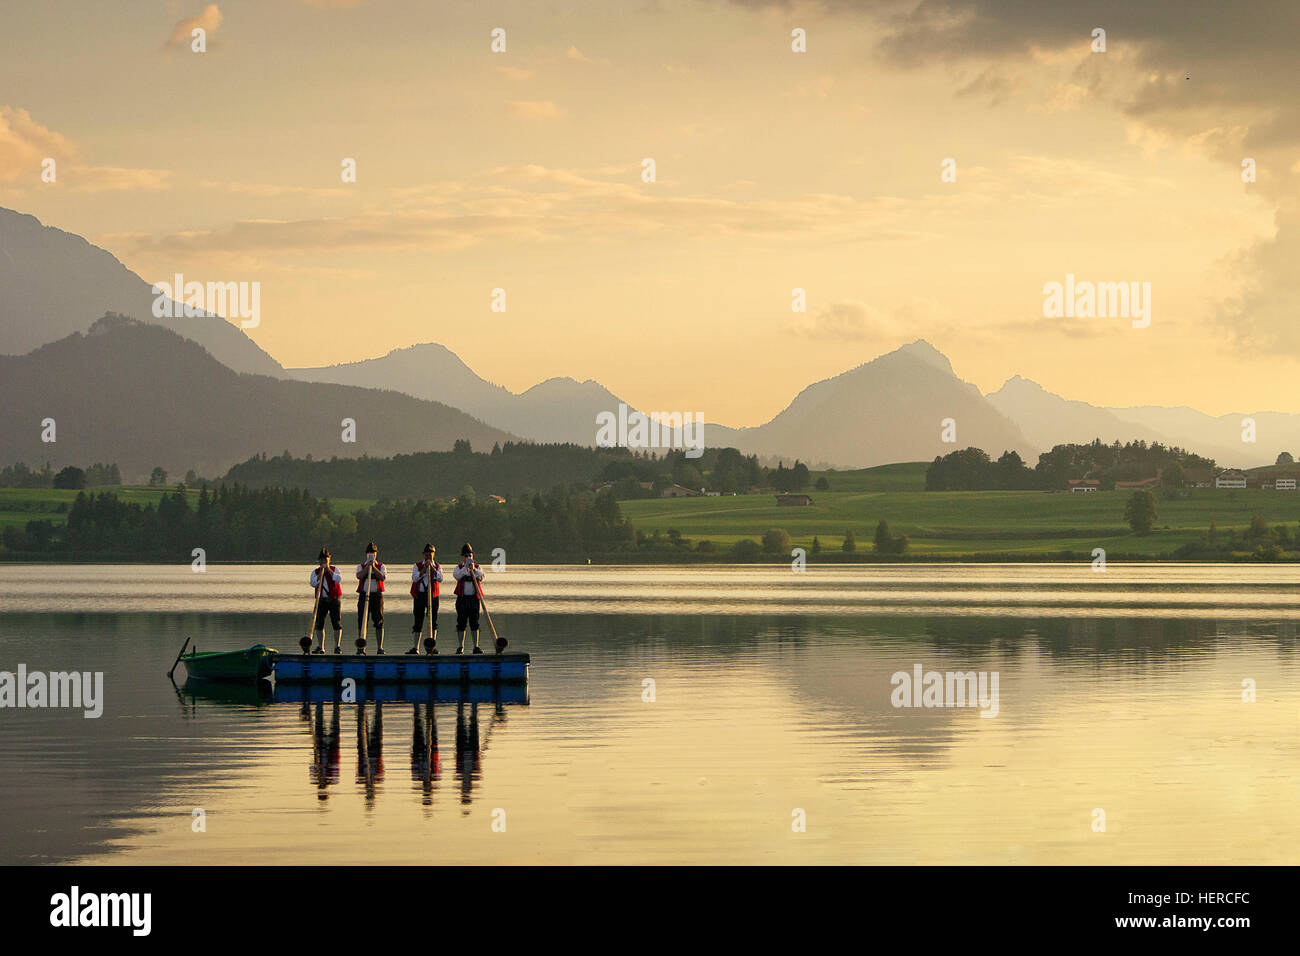 The alpenhorn blowers are reflecting at sundown in the summery Hopfensee lake, Alpine panorama in background Stock Photo